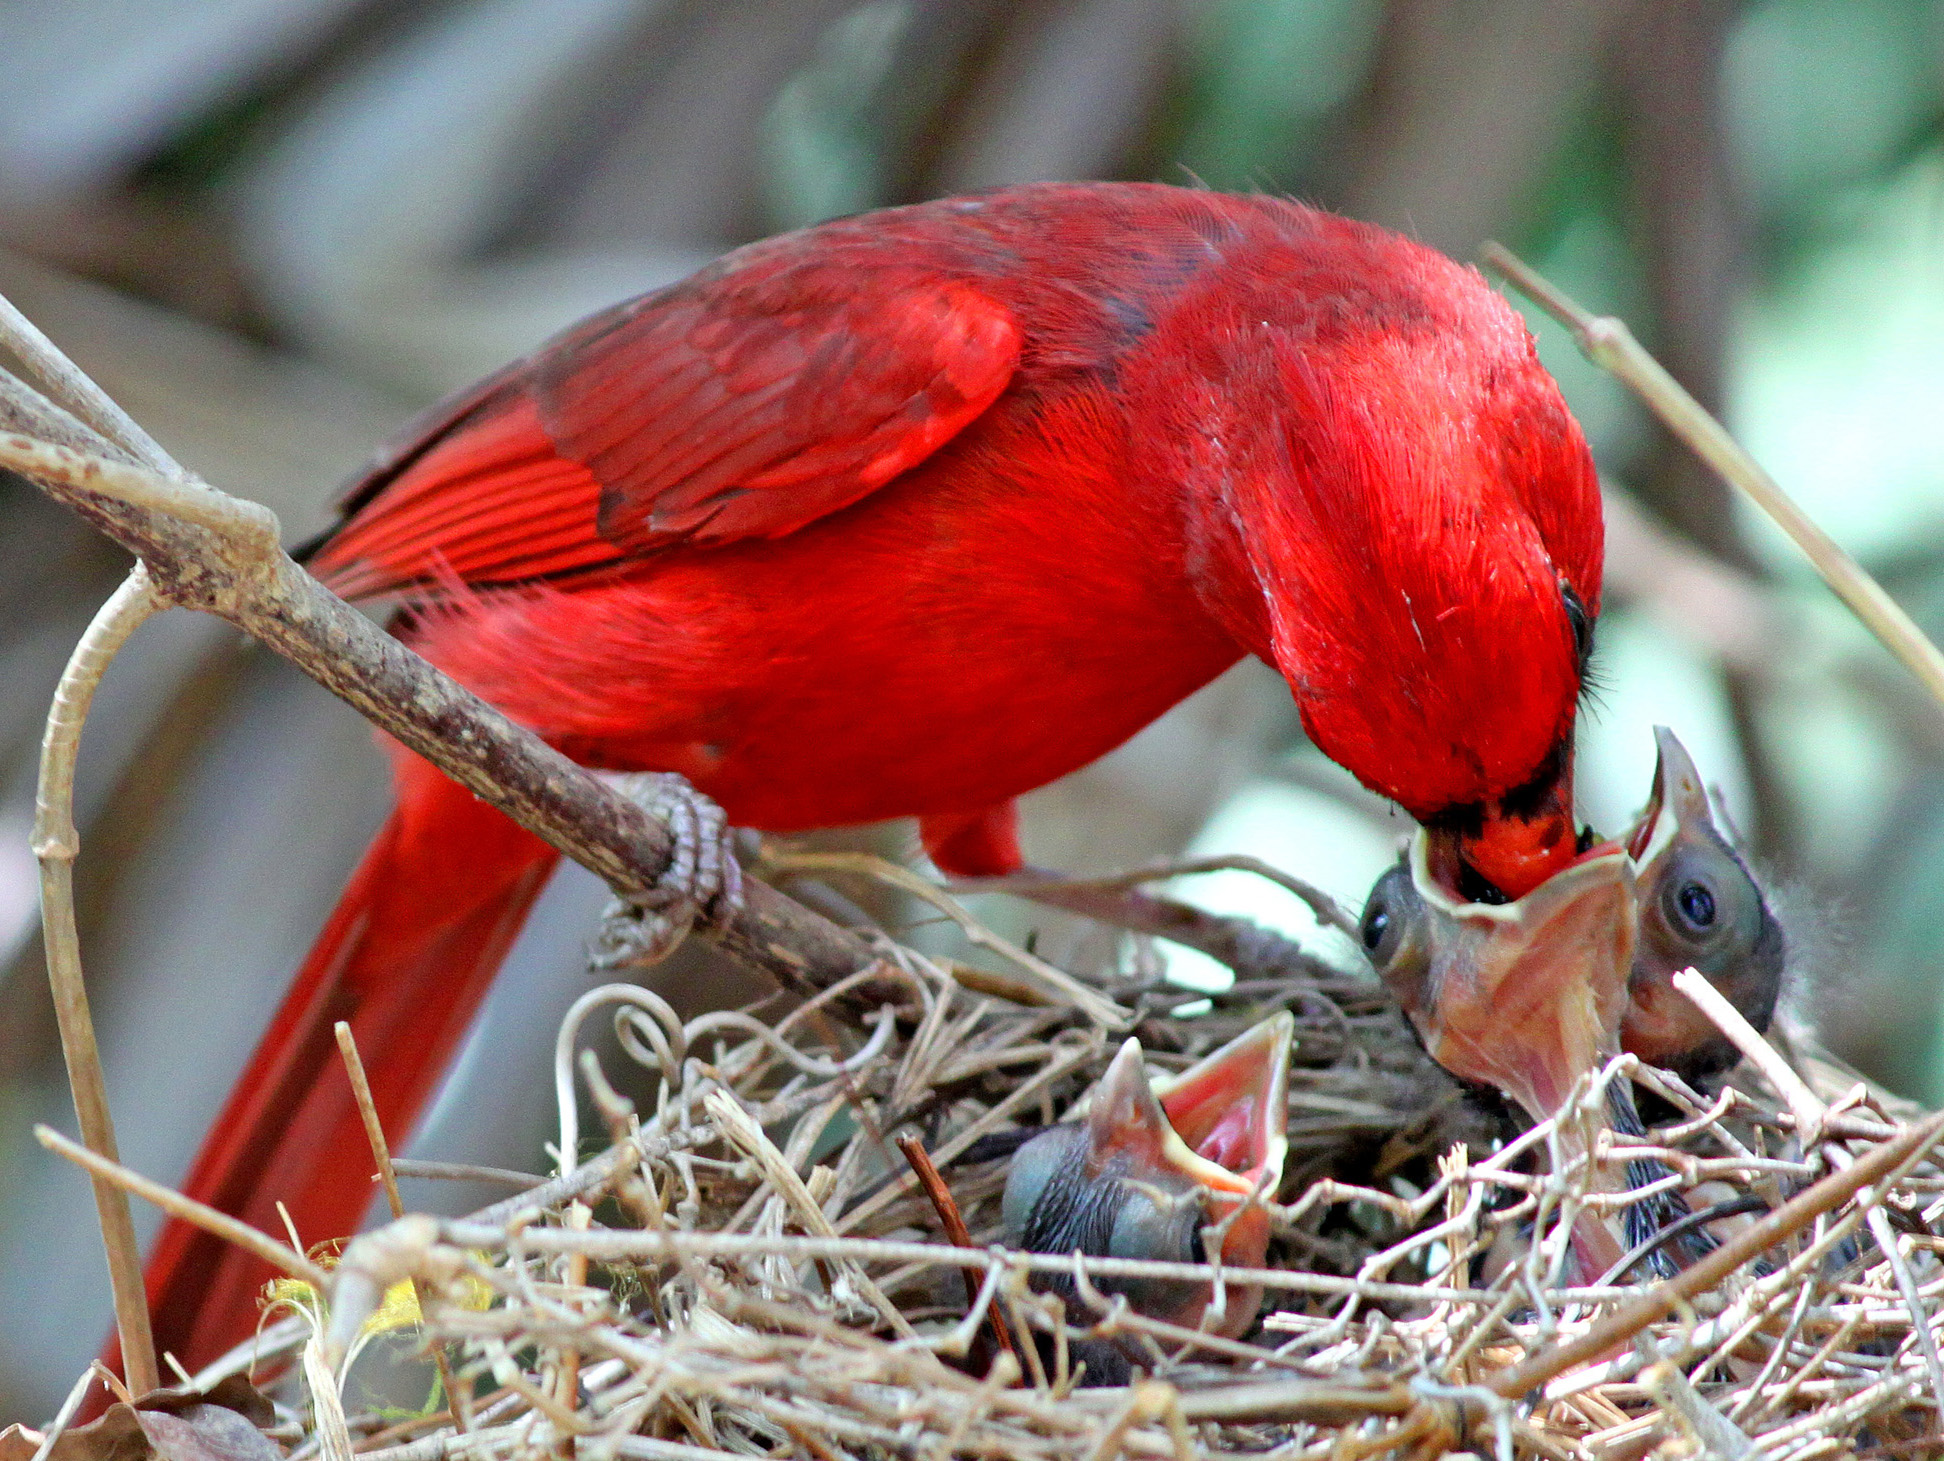 Northern Cardinals know how to shake their tail feathers - FeederWatch